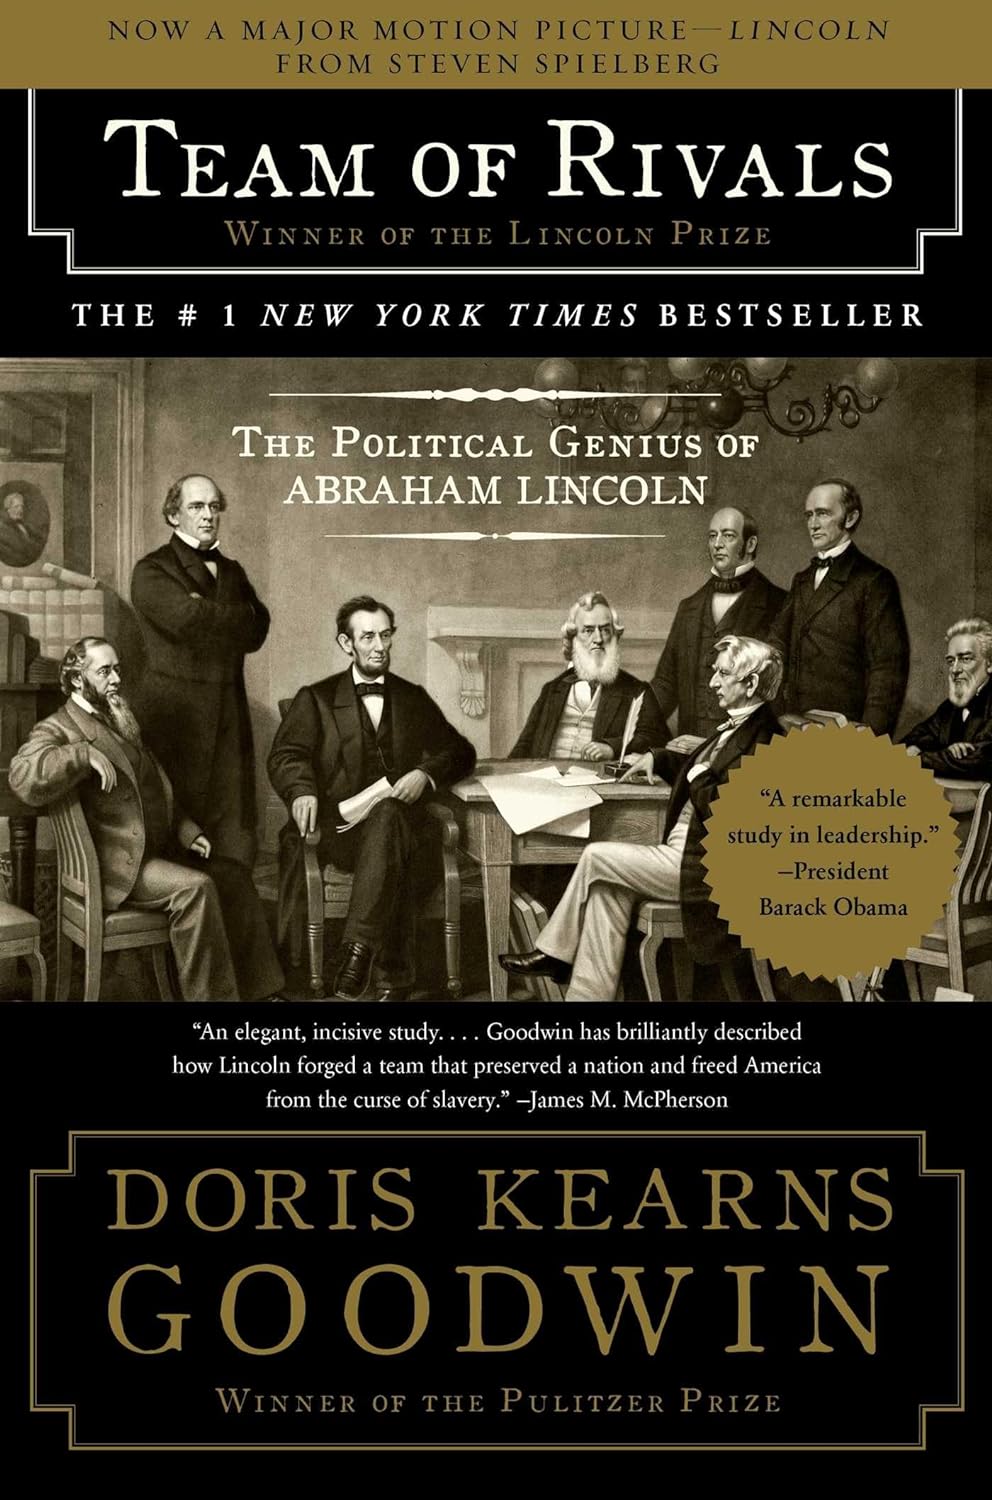 Team of Rivals The Political Genius of Abraham Lincoln by Doris Kearns Goodwin (2005)